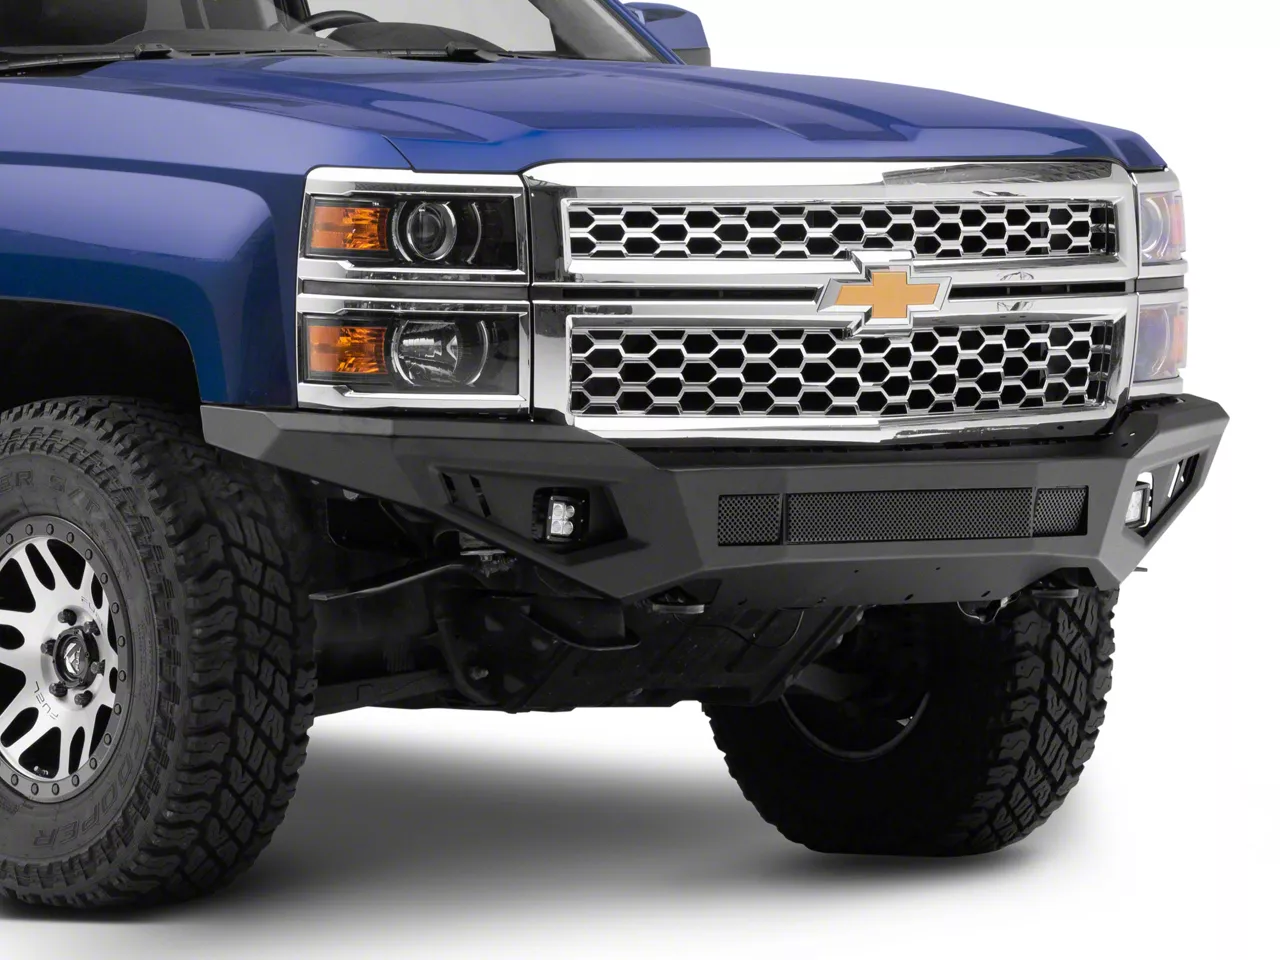 Barricade HD Off-Road Front Bumper with LED Lighting - Truck Exterior